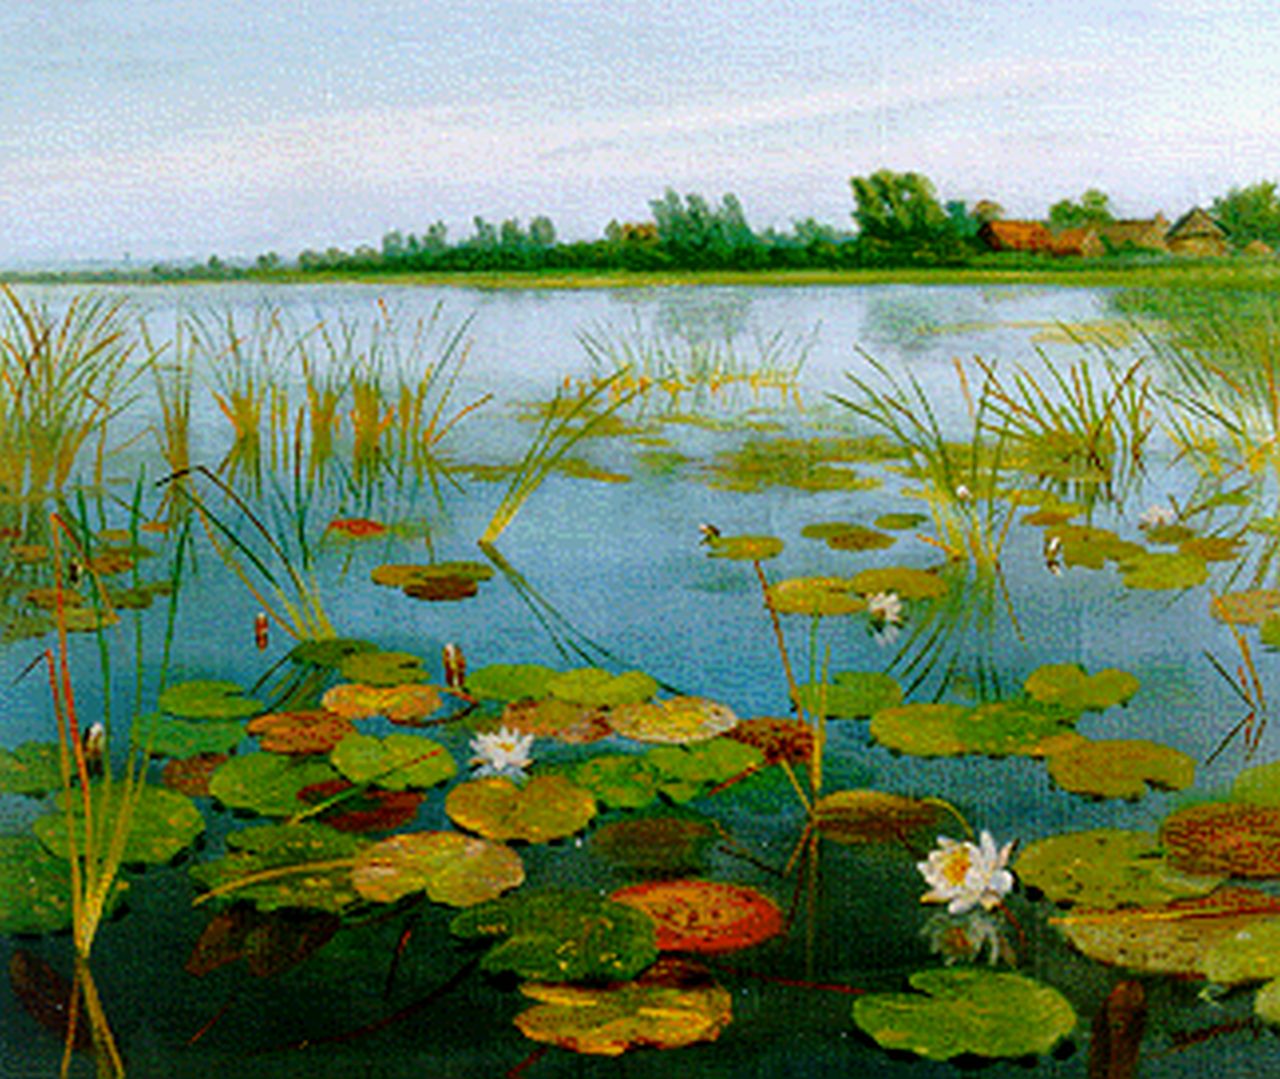 Smorenberg D.  | Dirk Smorenberg, Water lilies, oil on canvas 50.2 x 60.3 cm, signed l.r.